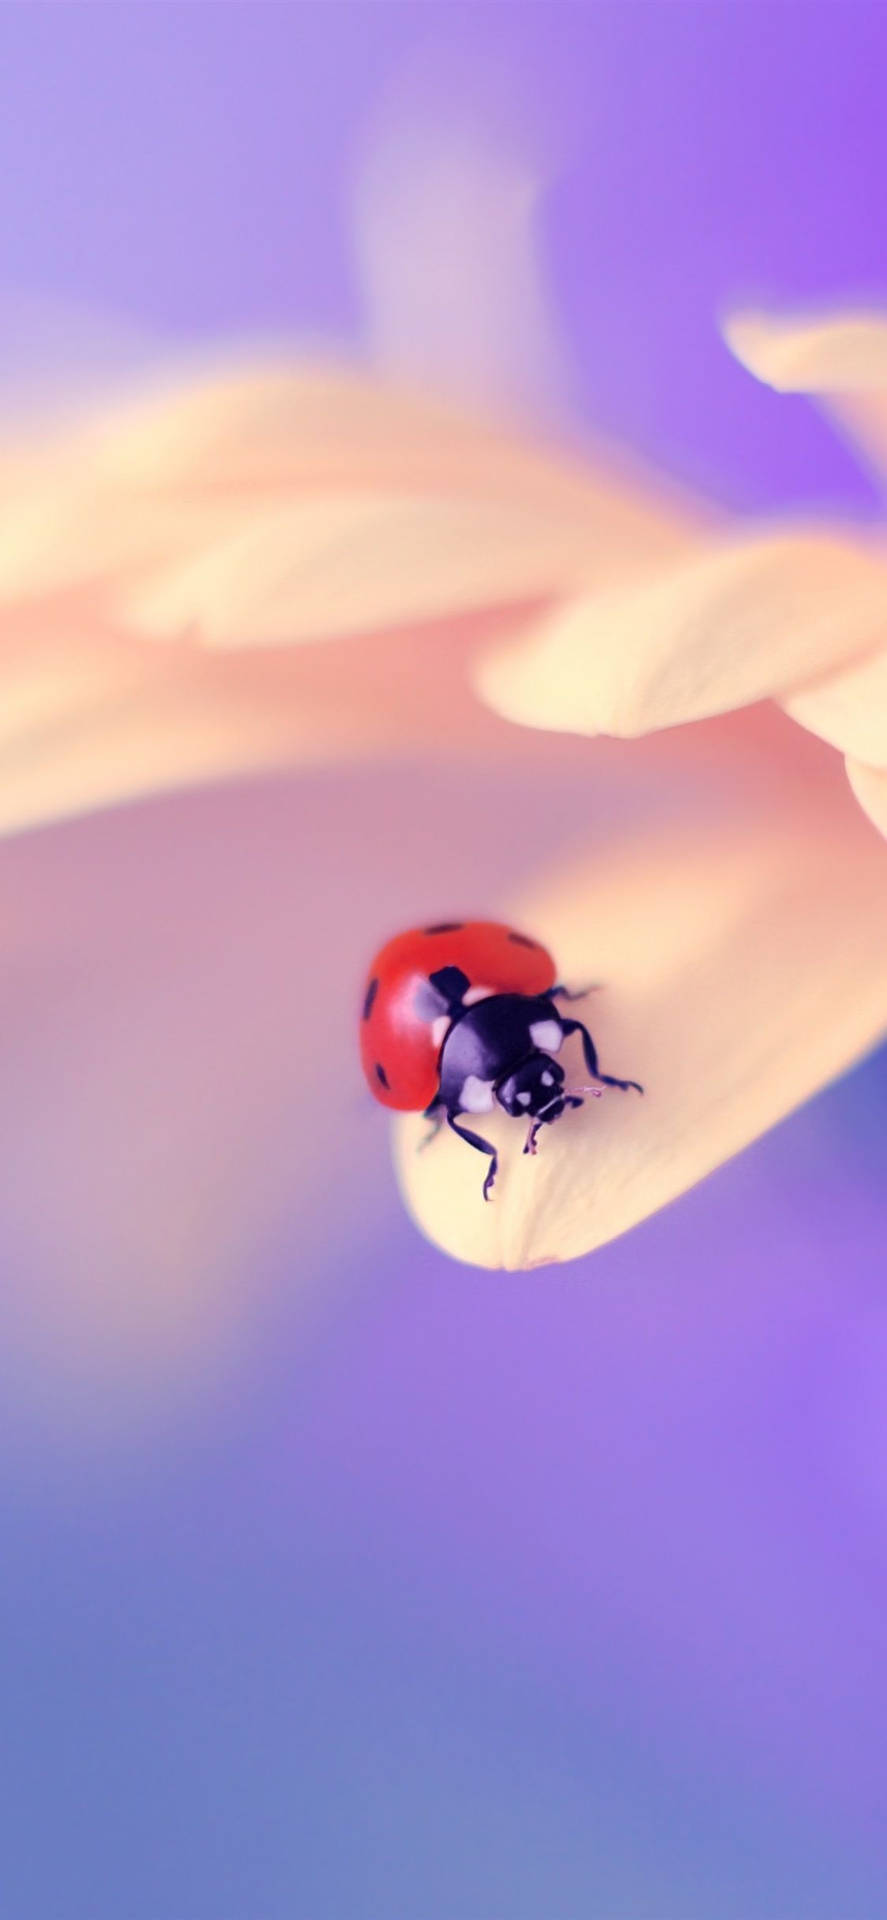 Ladybug Beetle Insect On A Flower Background